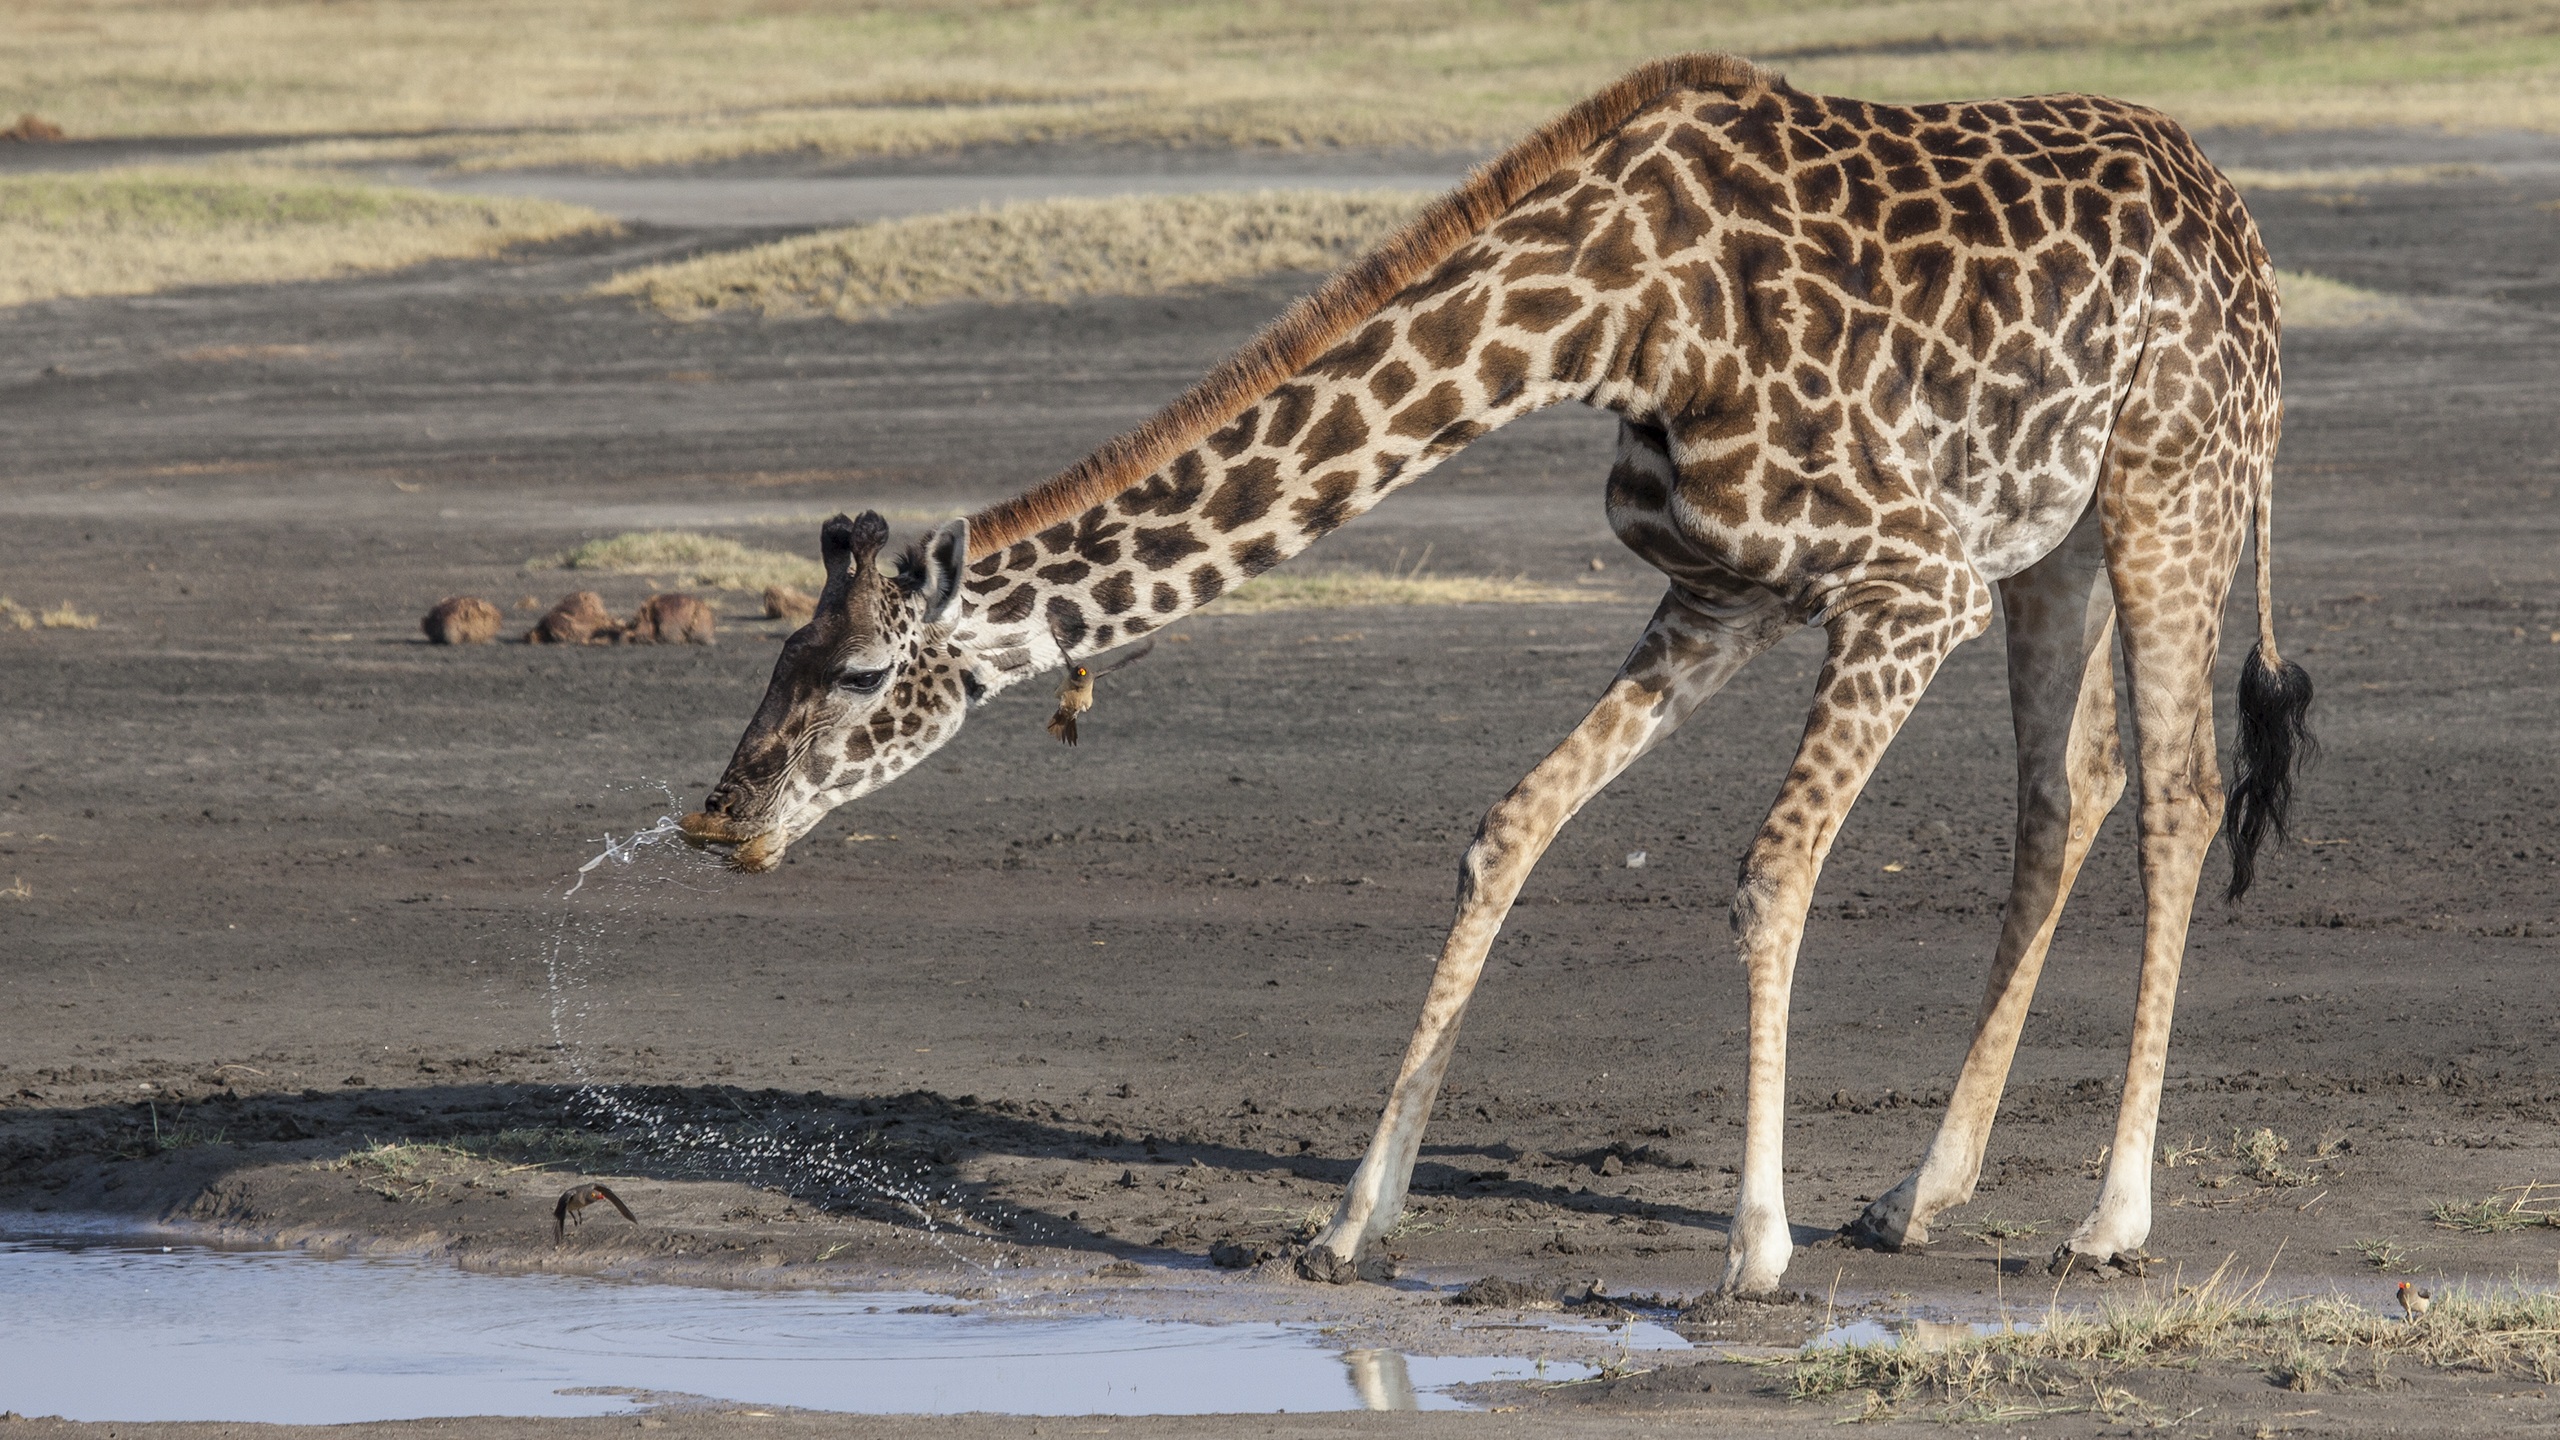 giraffe drinking from a pool of water in Africa HD Wallpaper